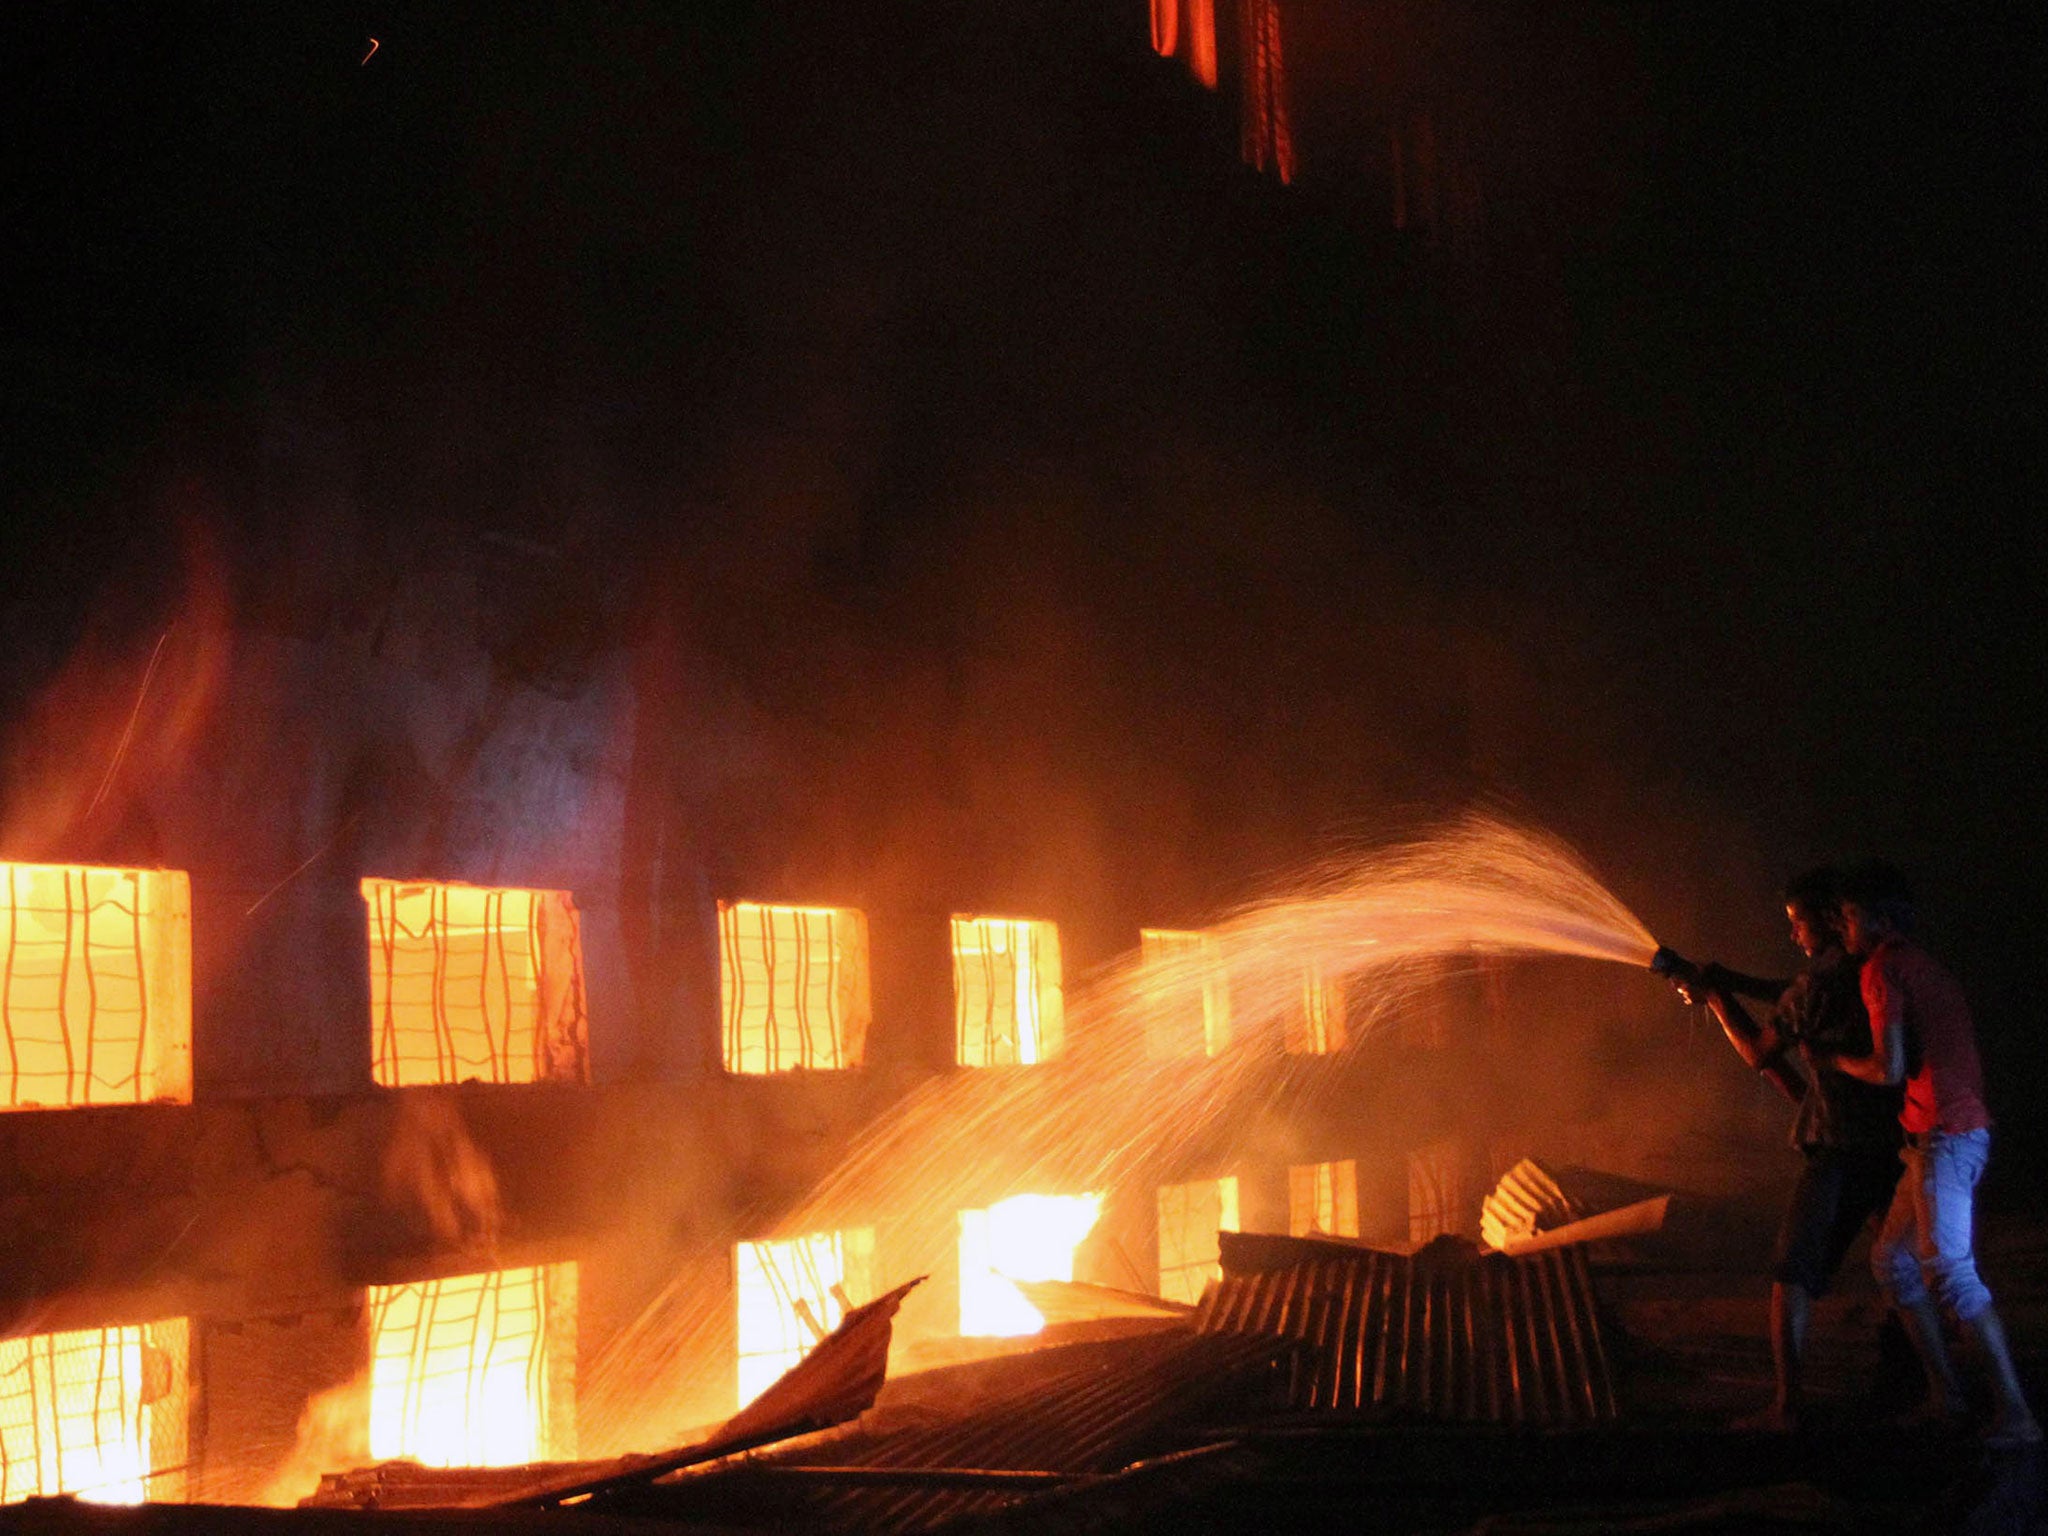 Bangladeshi people and firefighters trying to extinguish a fire in a garment factory